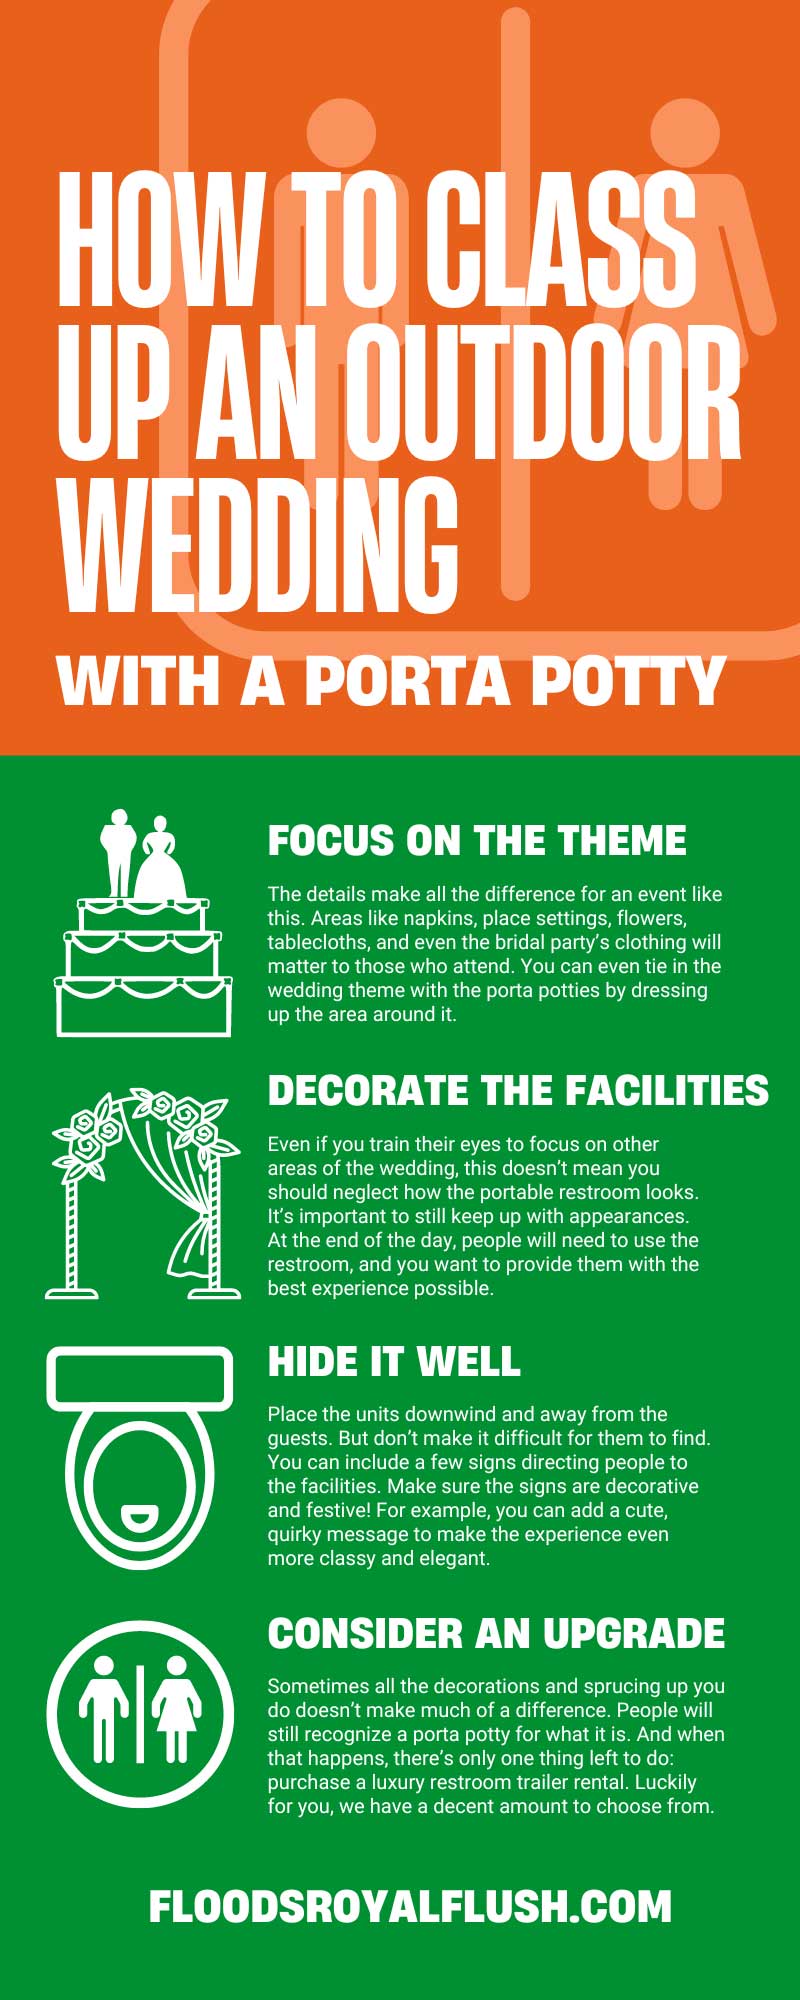 How To Class Up an Outdoor Wedding With a Porta Potty